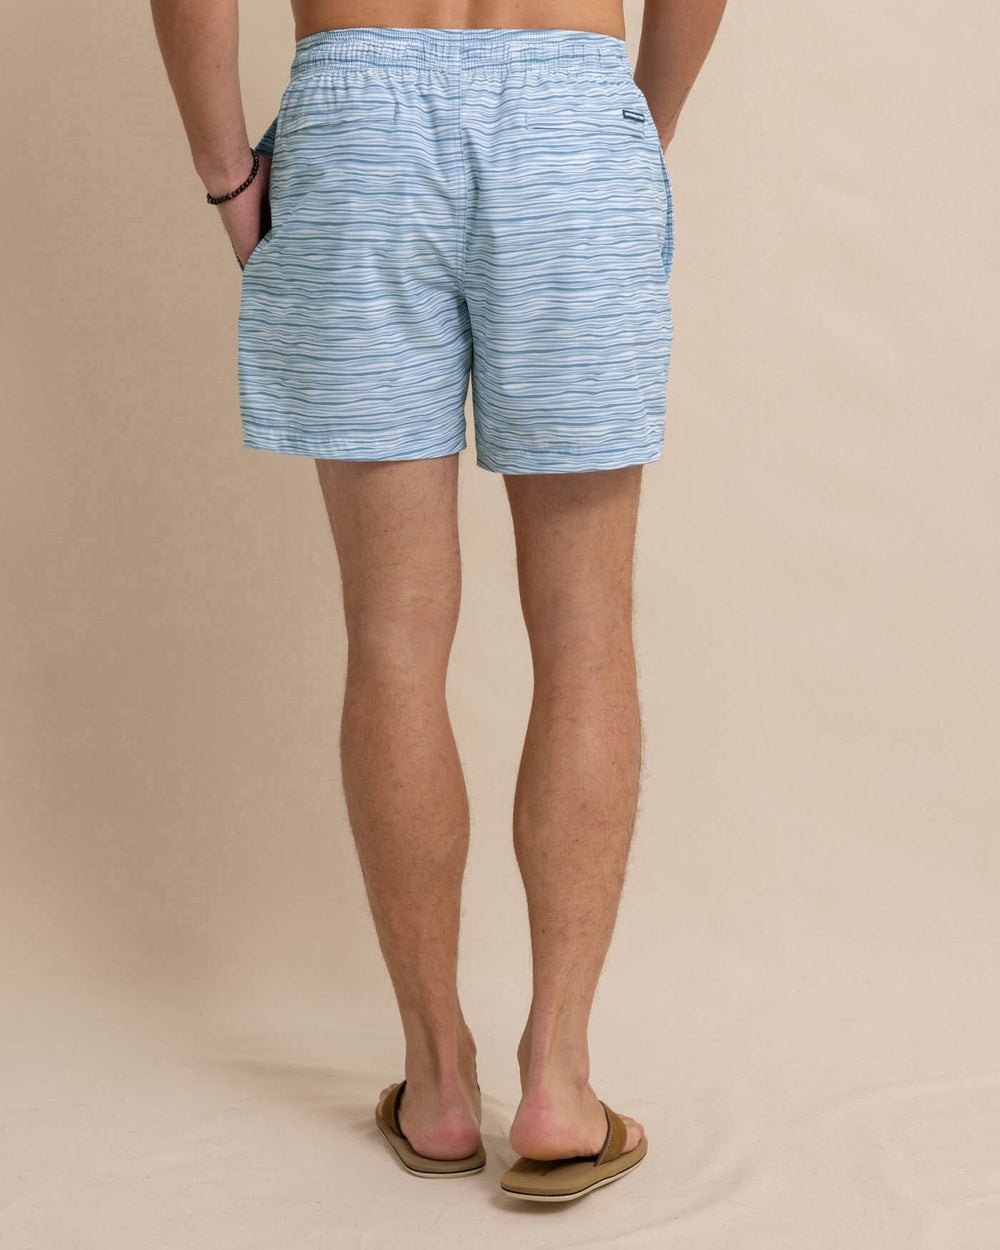 The back view of the Southern Tide Ocean Water Stripe Swim Trunk by Southern Tide - Subdued Blue